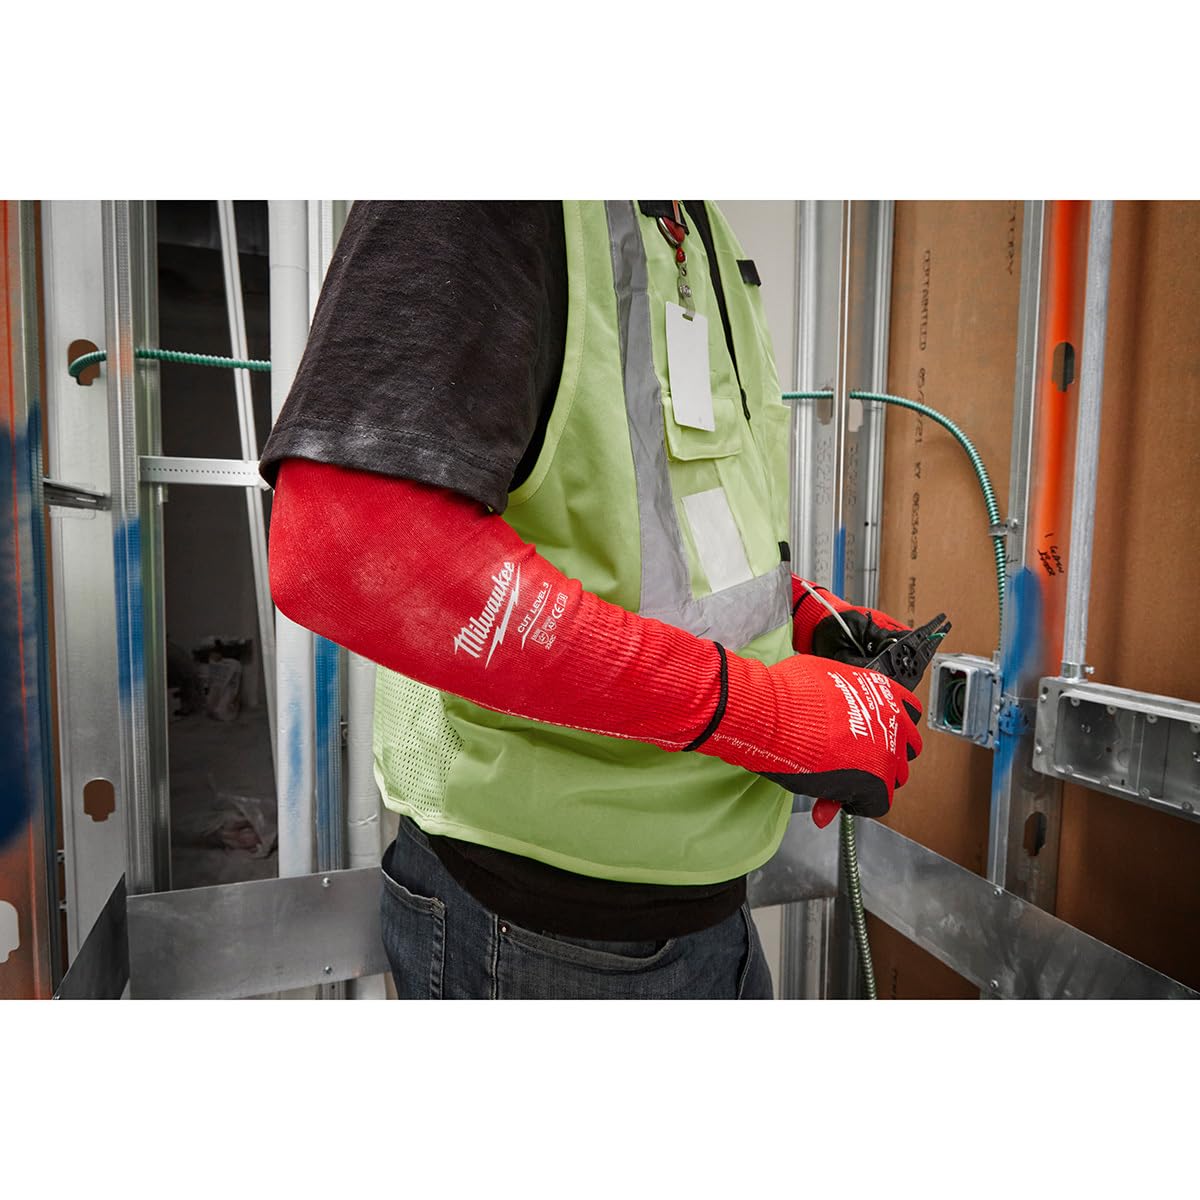 Milwaukee Pair of Cut Resistant 3(C) Protective Sleeves, 45 cm Length